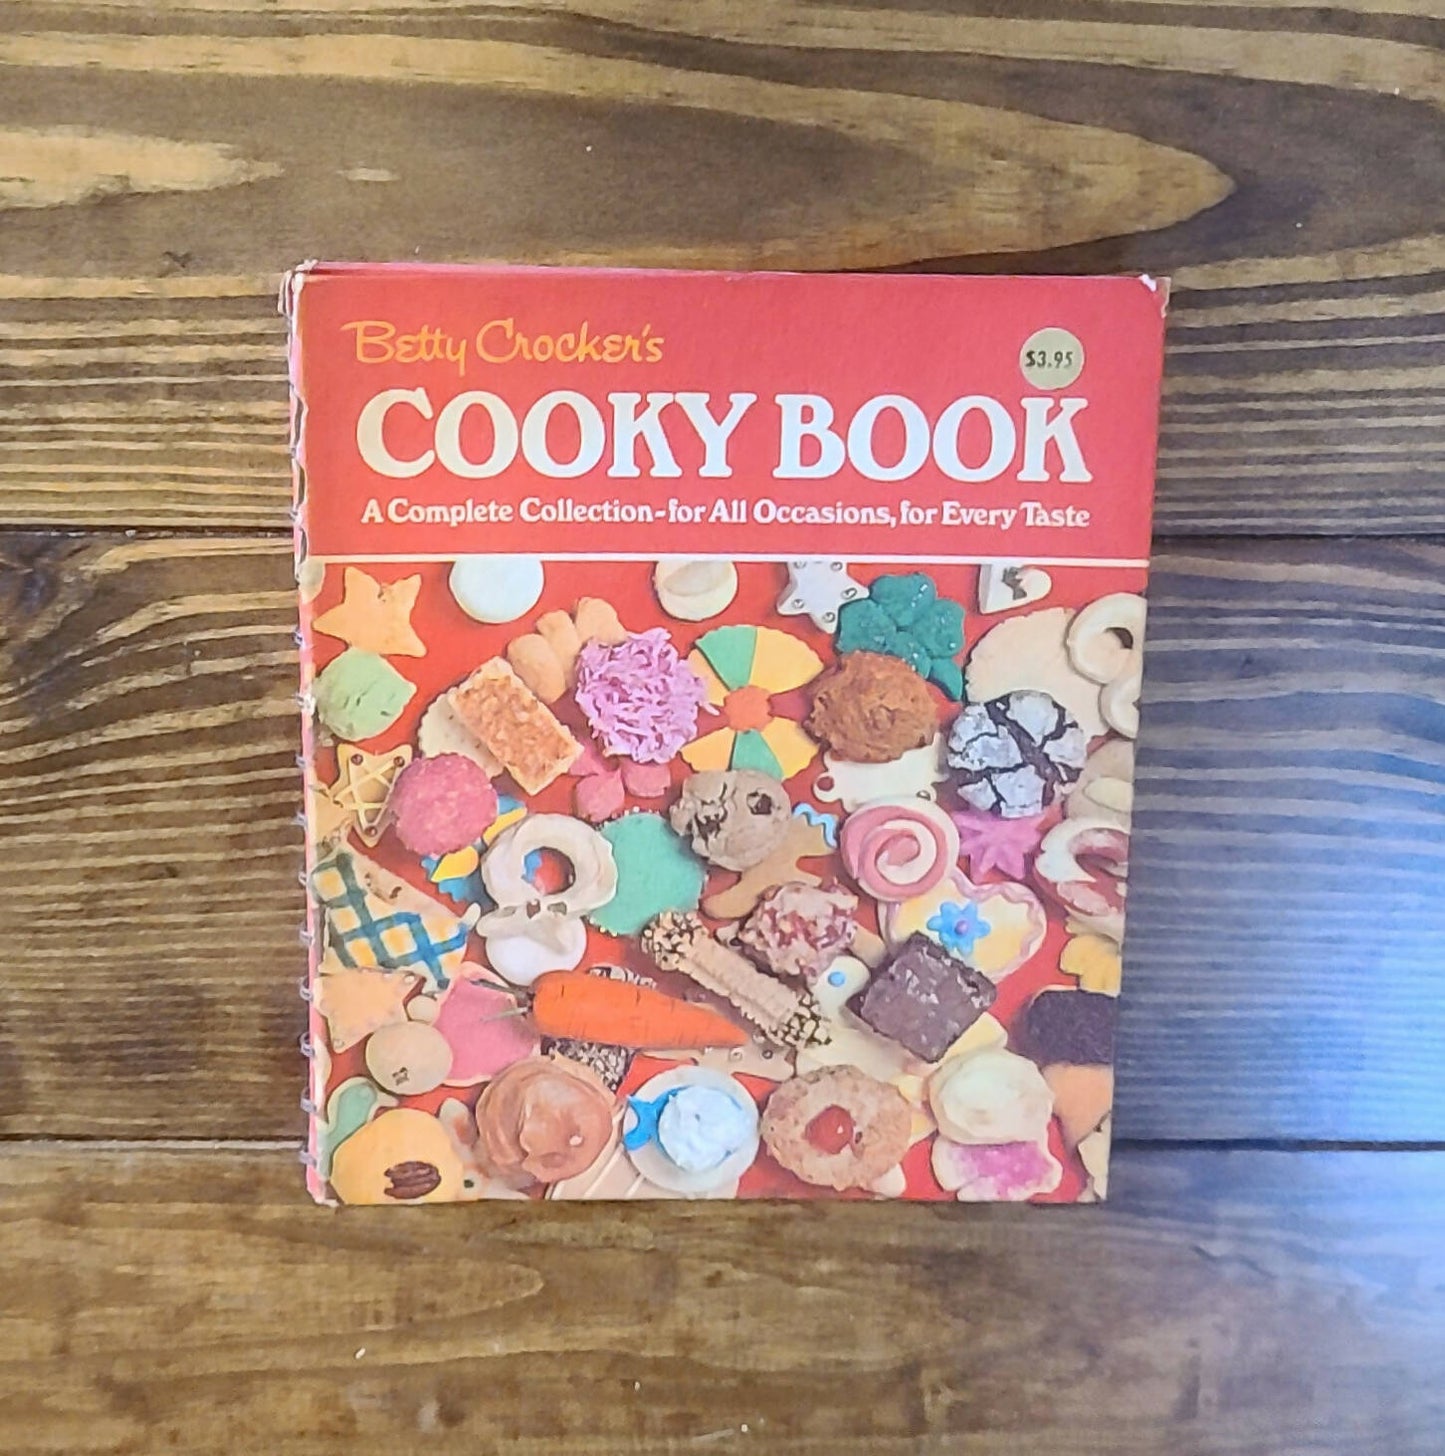 BC "Cooky" Book